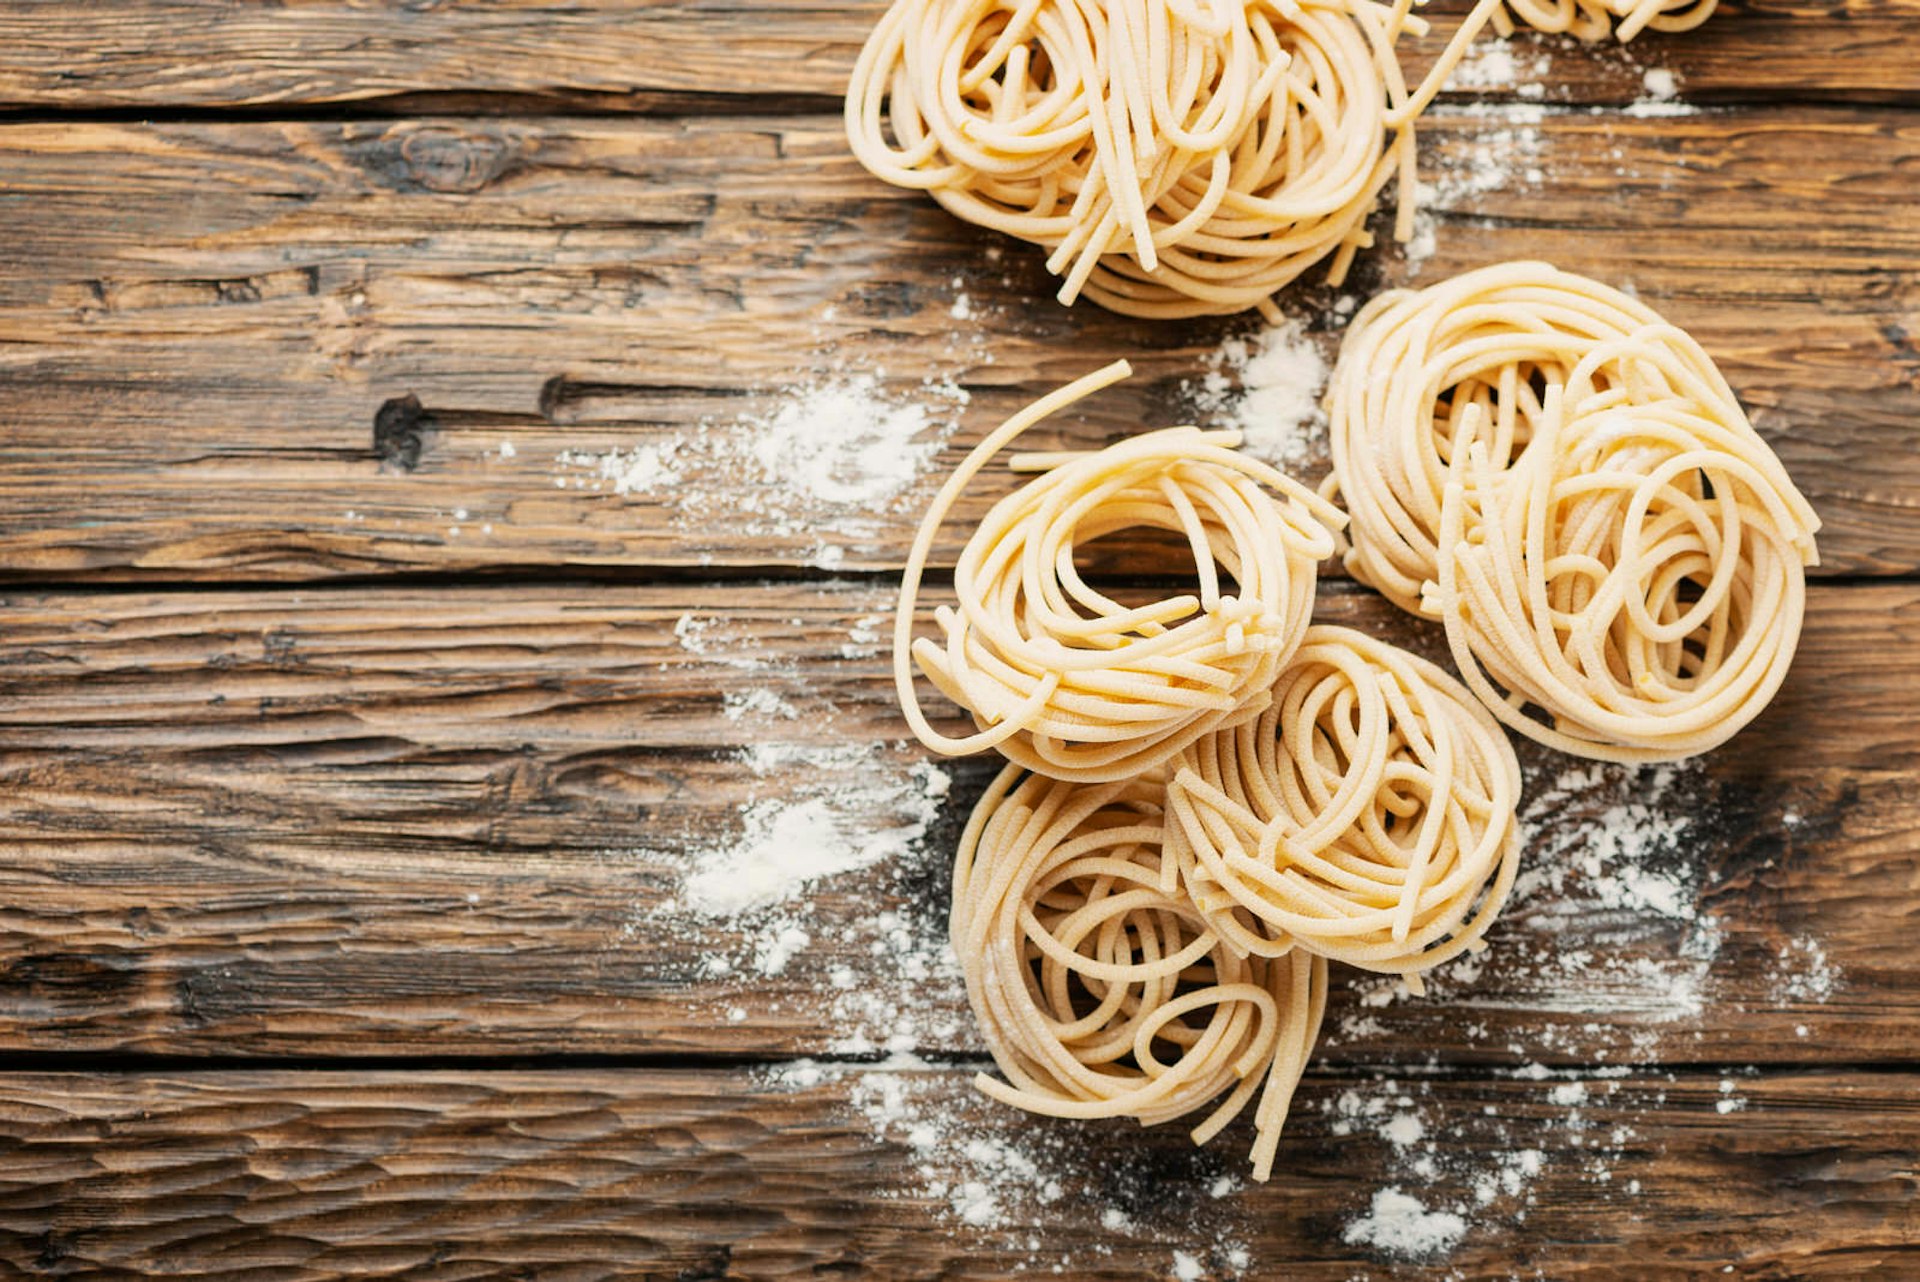 Several uncooked balls of pici pasta from Tuscany on a rough wooden table sprinkled with flour.